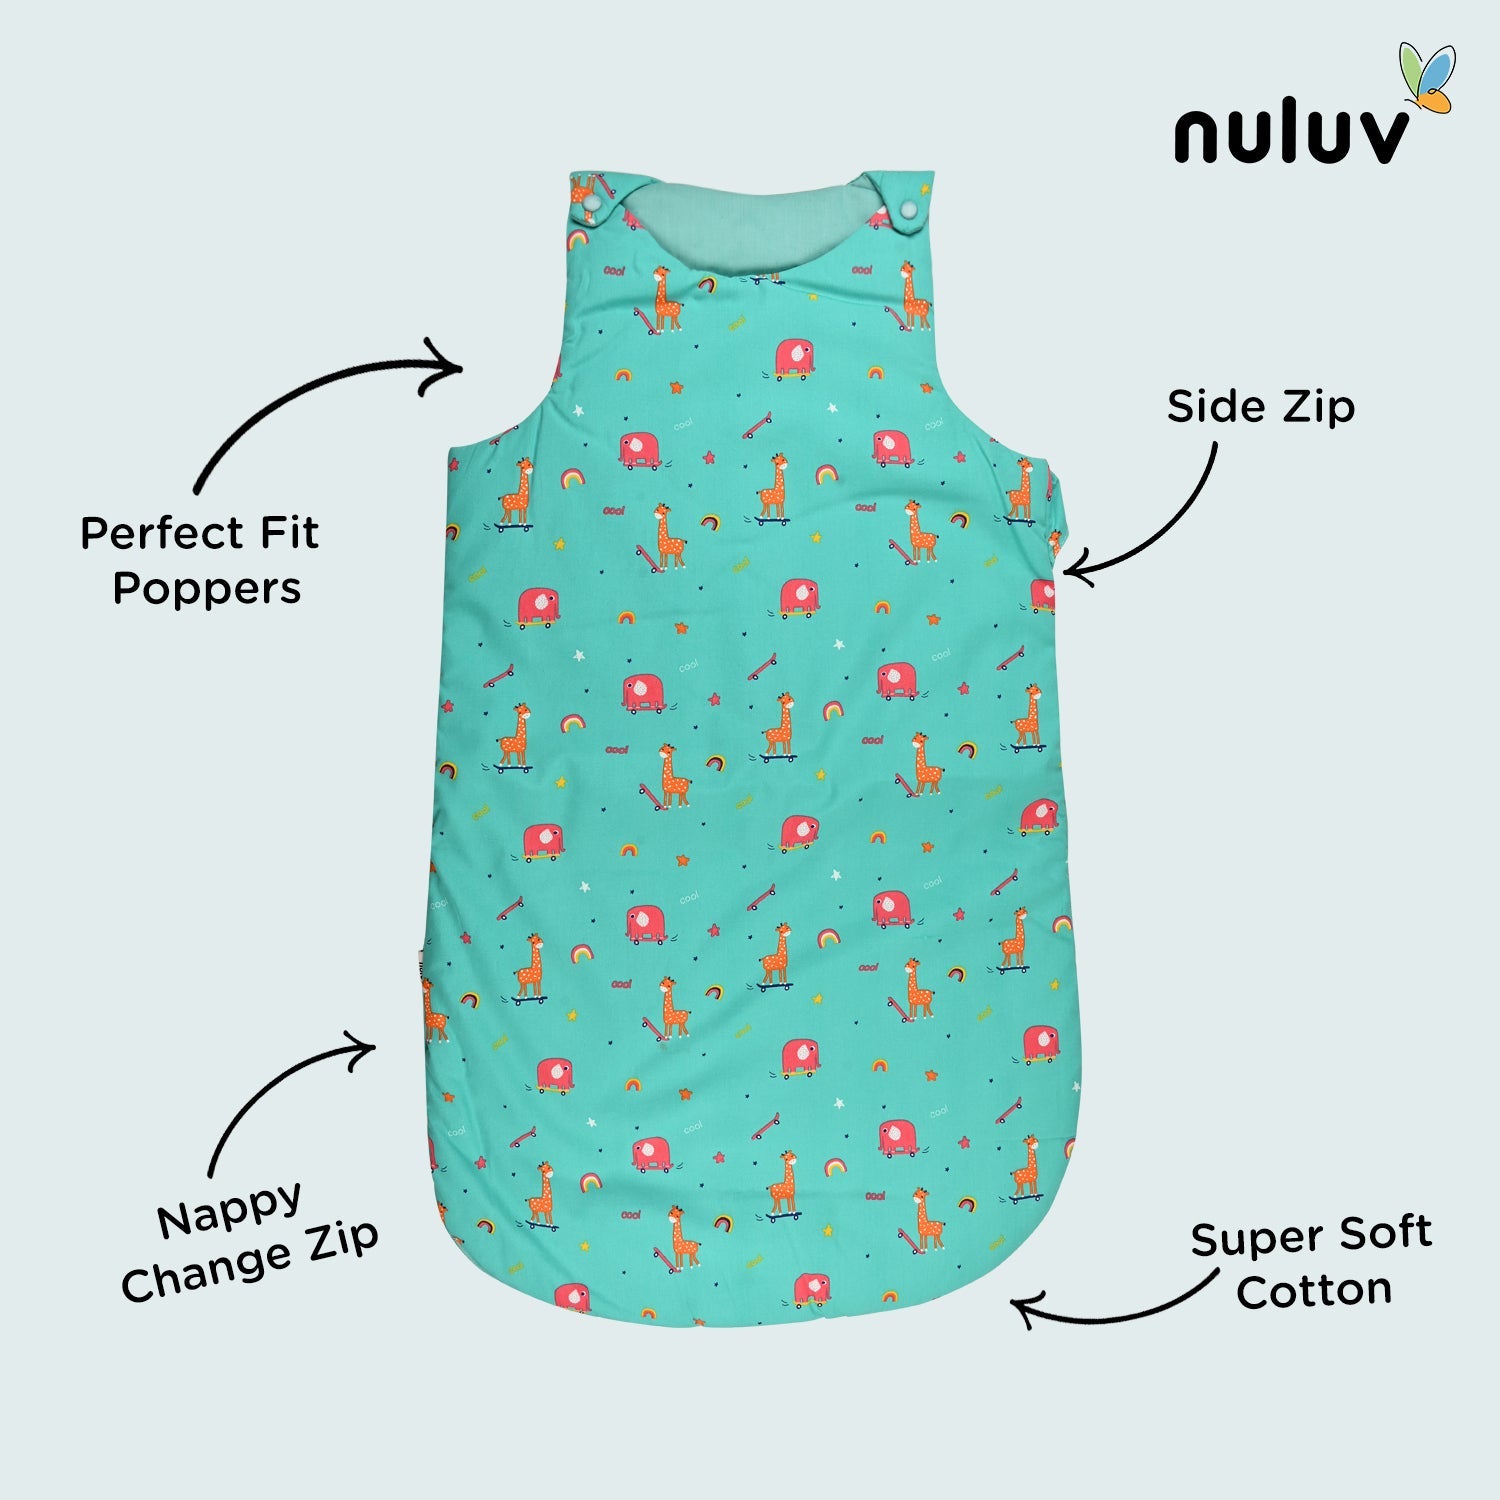 Nuluv Lt Green Sleeping Bag 100 % Organic Cotton with Antimicrobial Finish - Toys4All.in